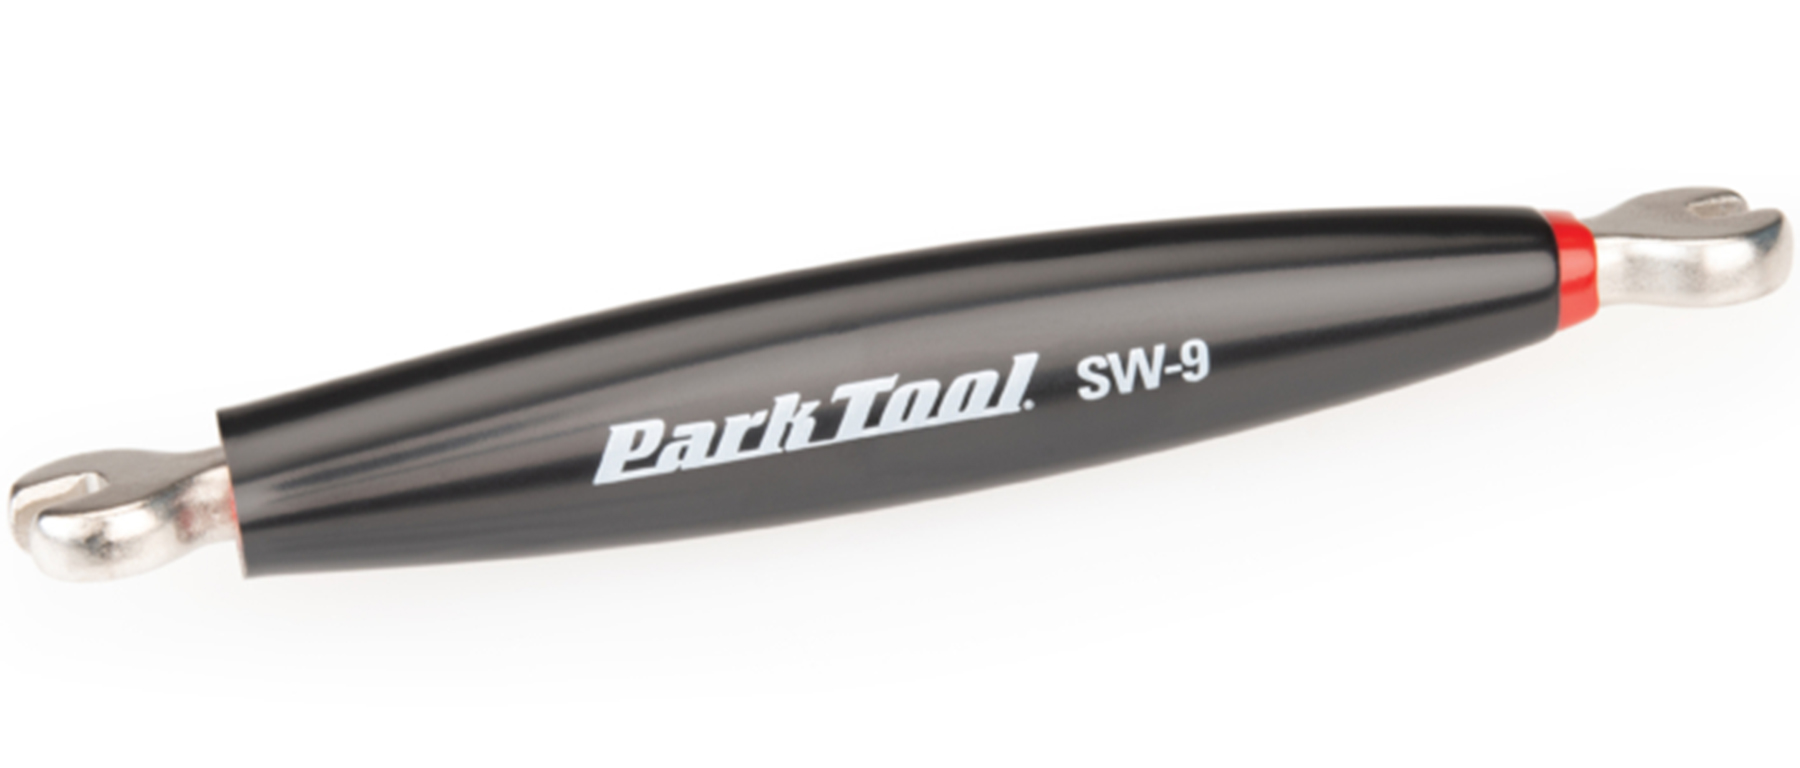 Park Tool SW-9 Double Ended Spoke Wrench